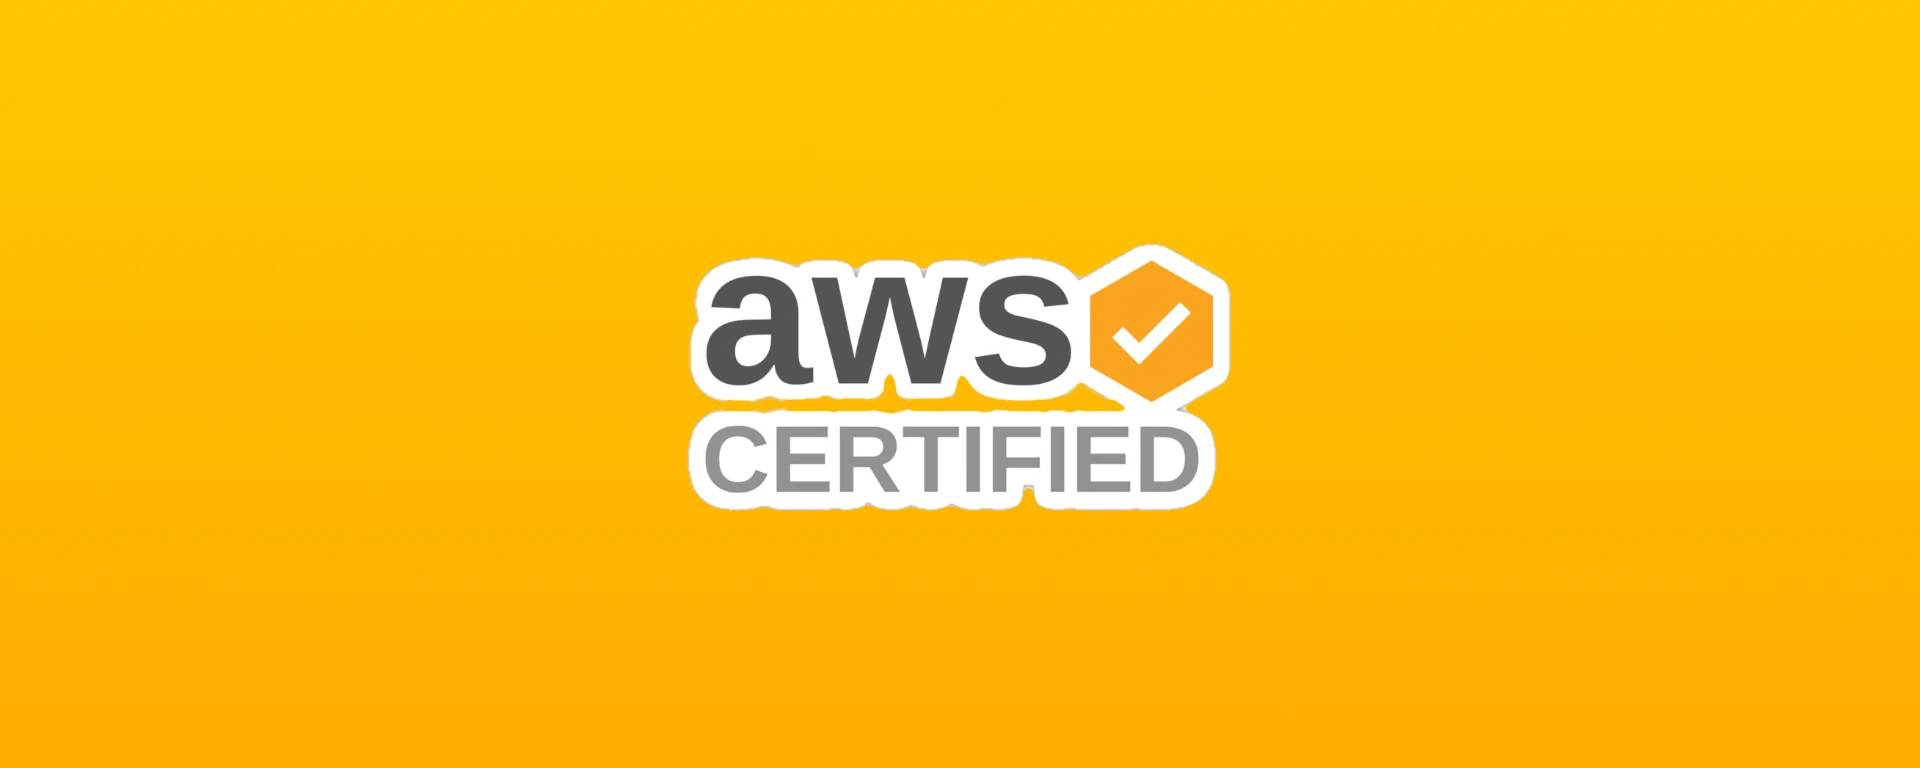 7 best tips for passing any AWS Certification exam